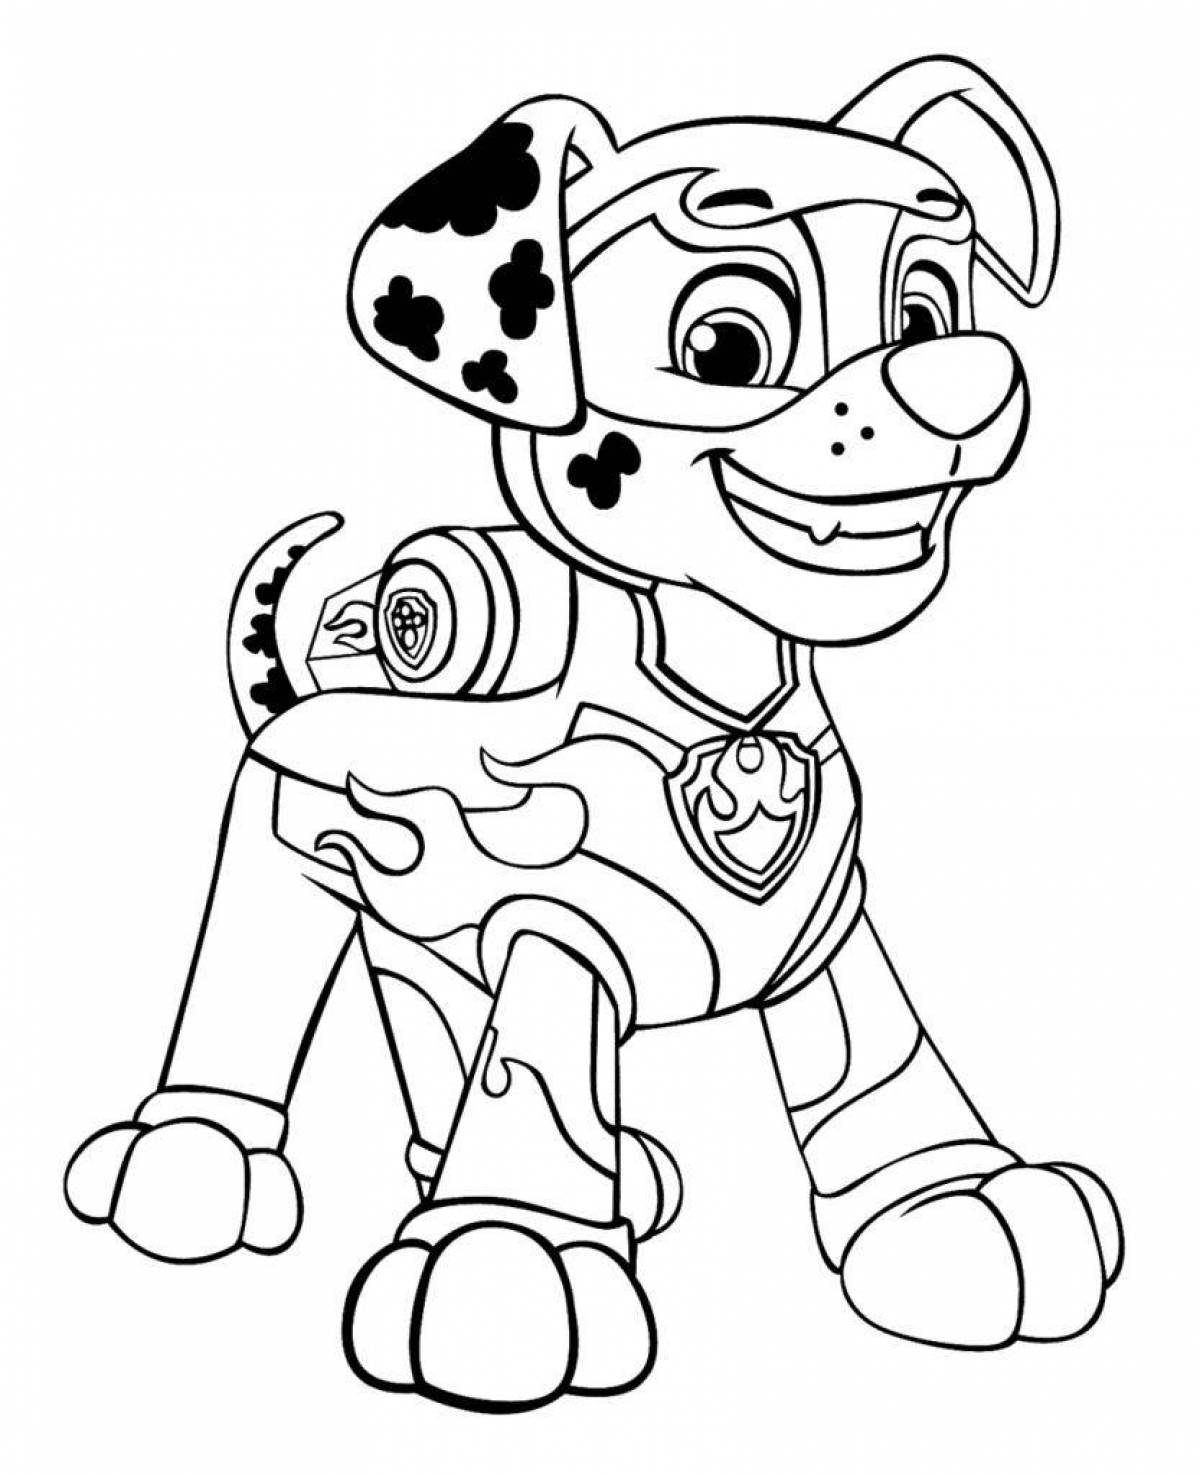 Animated Paw Patrol Coloring Page for Boys